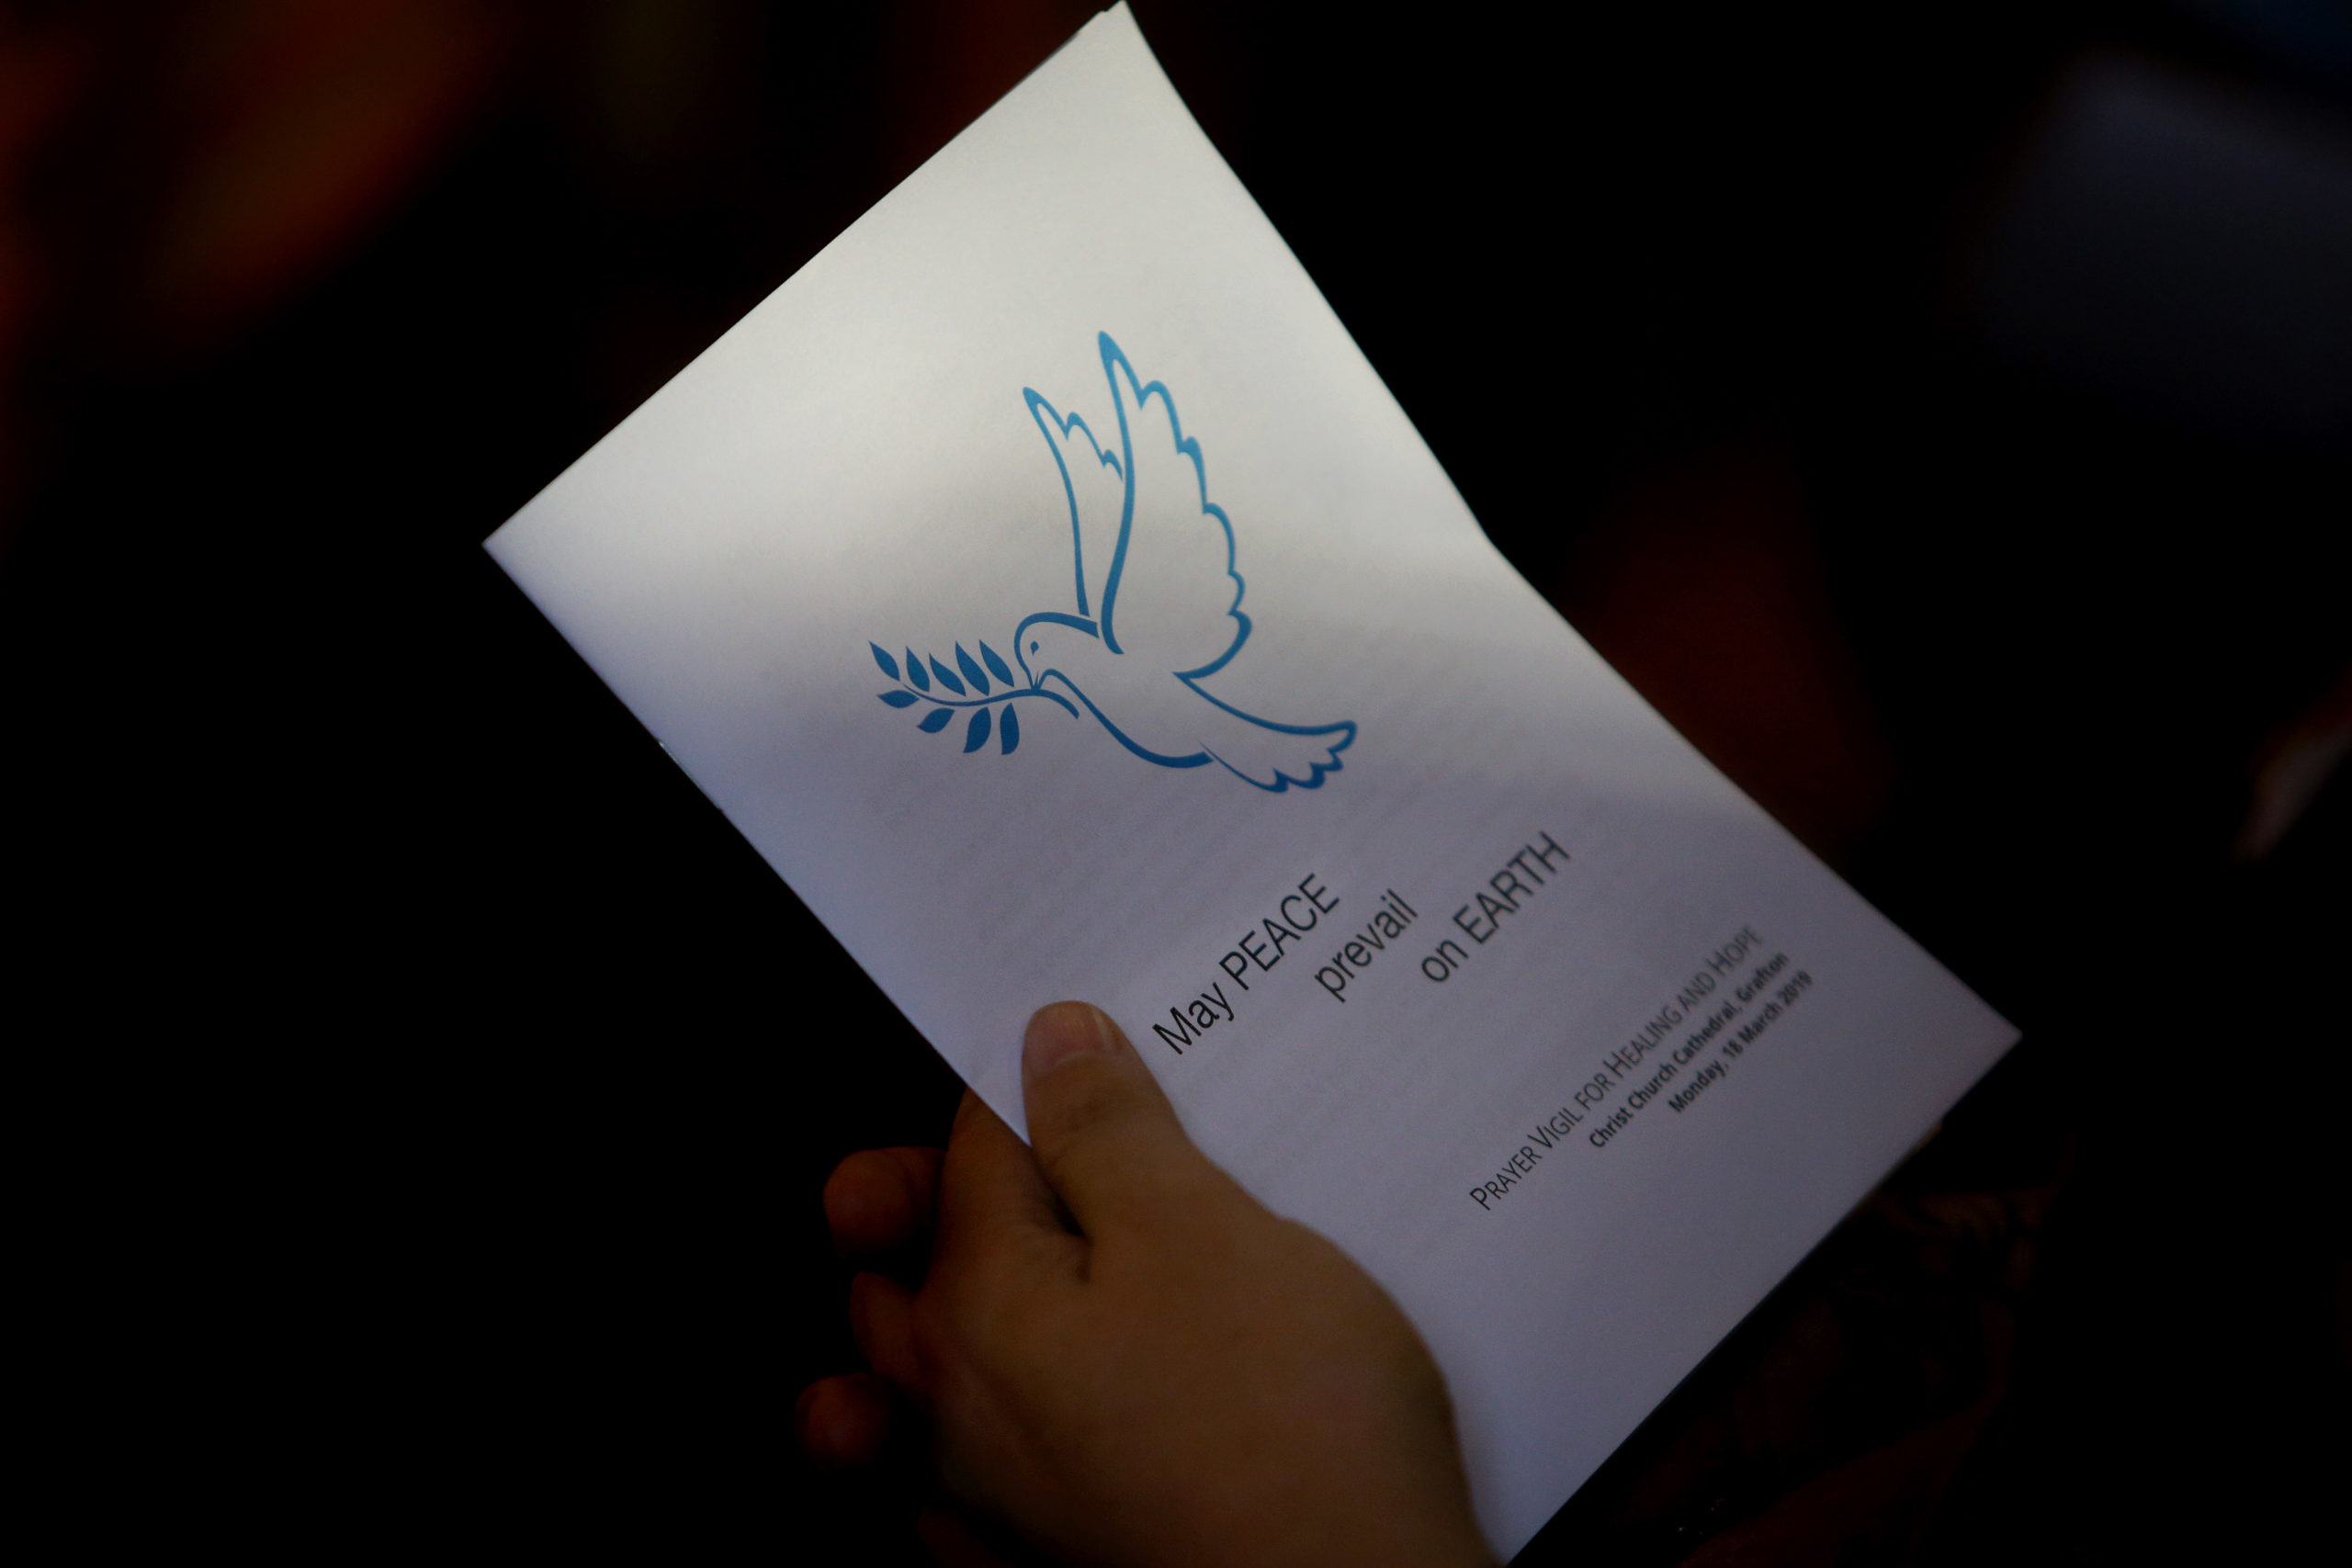 A women holds a service booklet during a prayer vigil conducted by Dean, Reverend Dr Gregory Jenks in solidarity with the families and victims of the Christchurch attacks, the vigil was held at the Christ Church Cathedral on March 18, 2019 in Grafton, Australia. Australian-born resident of Dunedin, Brenton Harris Tarrant grew up in the Australian town of Grafton where he reportedly attended Grafton High School and worked at a local Gym. He has been charged with murder following attacks on the Al Noor mosque and Linwood mosque in Christchurch on Friday, 15 March which took the lives of 50 people and many injured still remain in hospital. The attack is the worst mass shooting in New Zealand's history. (Photo by Lisa Maree Williams/Getty Images)